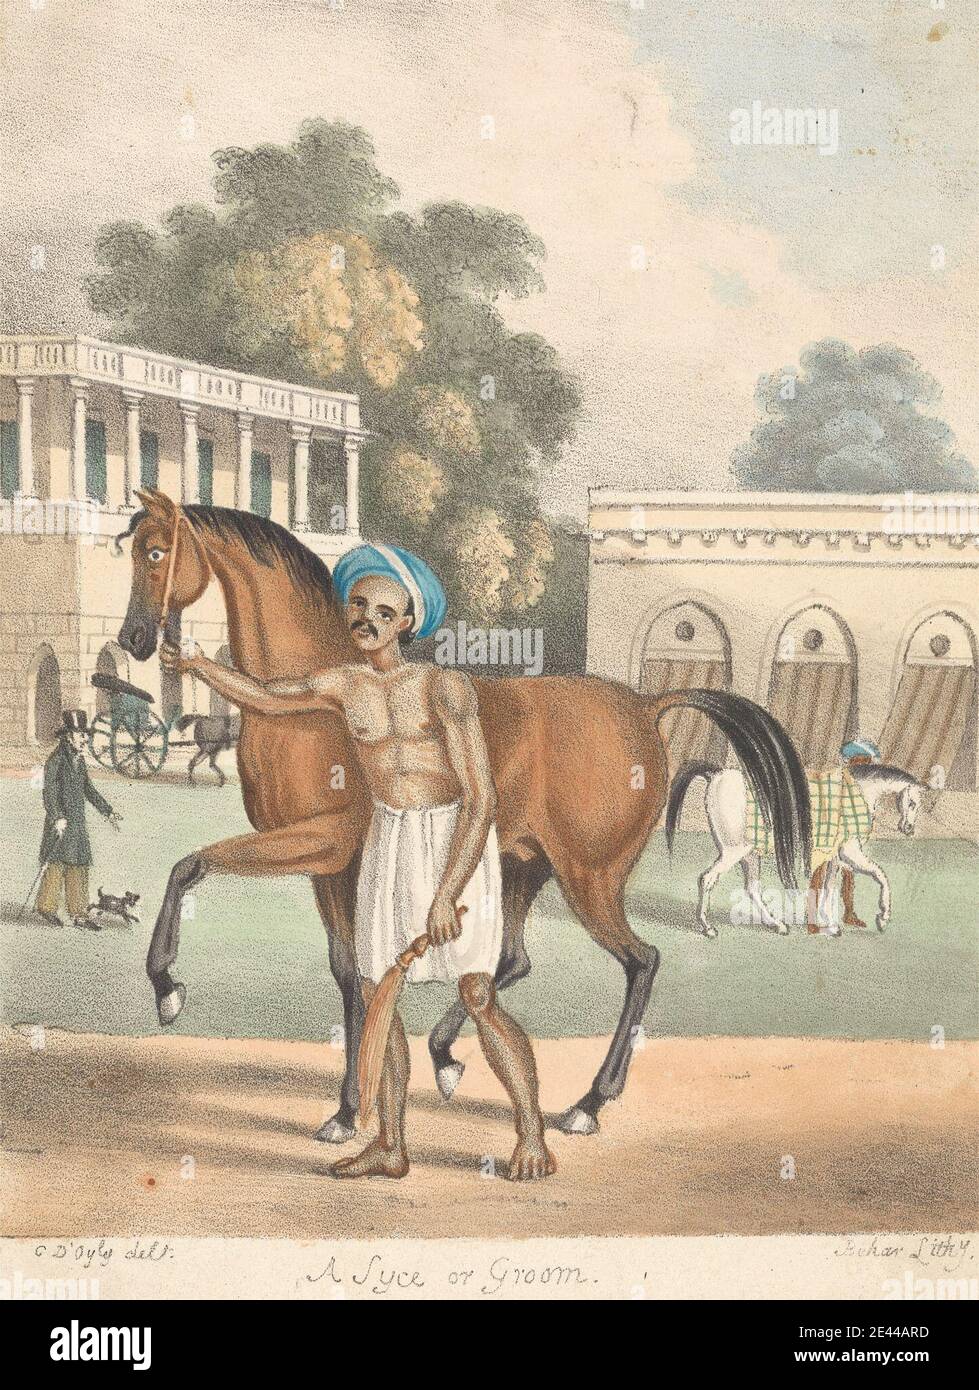 Sir Charles D'Oyly, 1781â€“1845, British, active in India, A Syce or Groom, undated. Chromolithograph on medium, slightly textured, cream wove paper mounted on moderately thick, slightly textured, beige wove paper.   animal art , arches , architectural subject , buildings , cane , columns , dog (animal) , genre subject , grass , grooms , horses (animals) , Indian , nobleman , path , servant , servants , top hat , trees , turbans , whisk. India Stock Photo